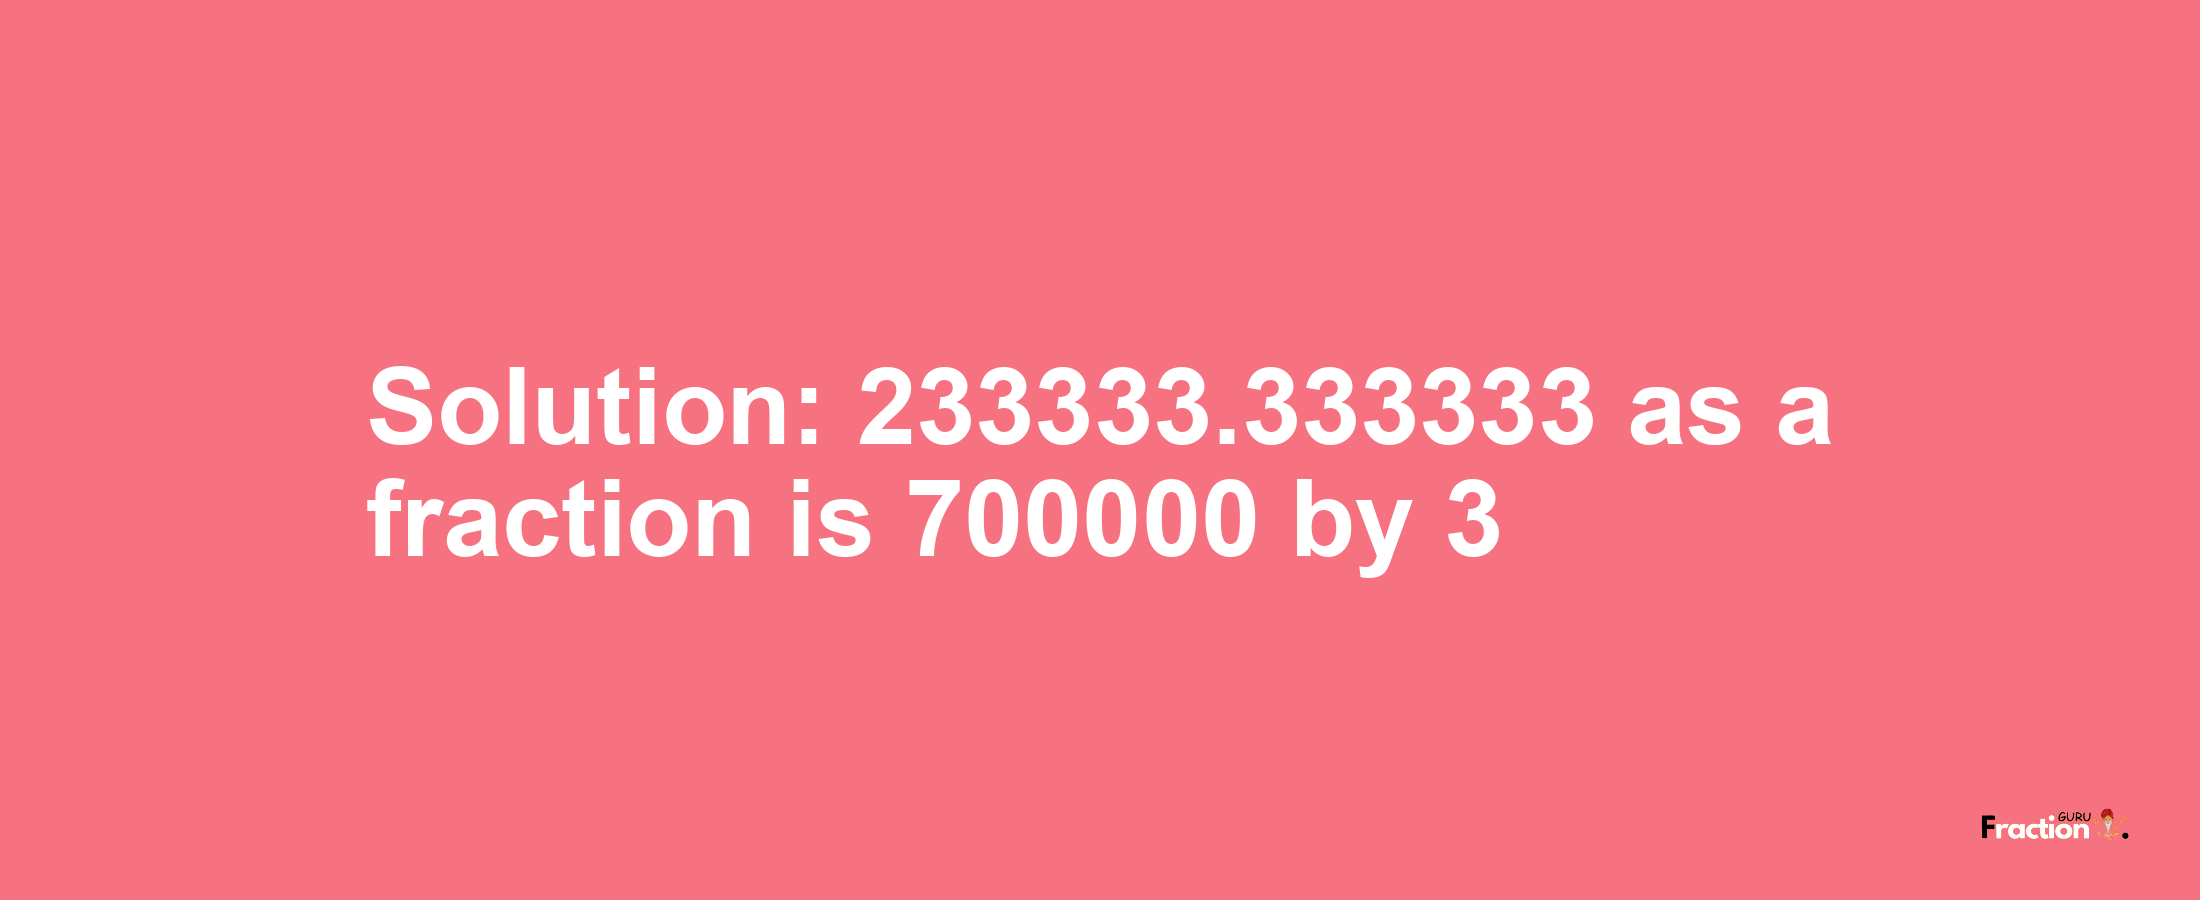 Solution:233333.333333 as a fraction is 700000/3